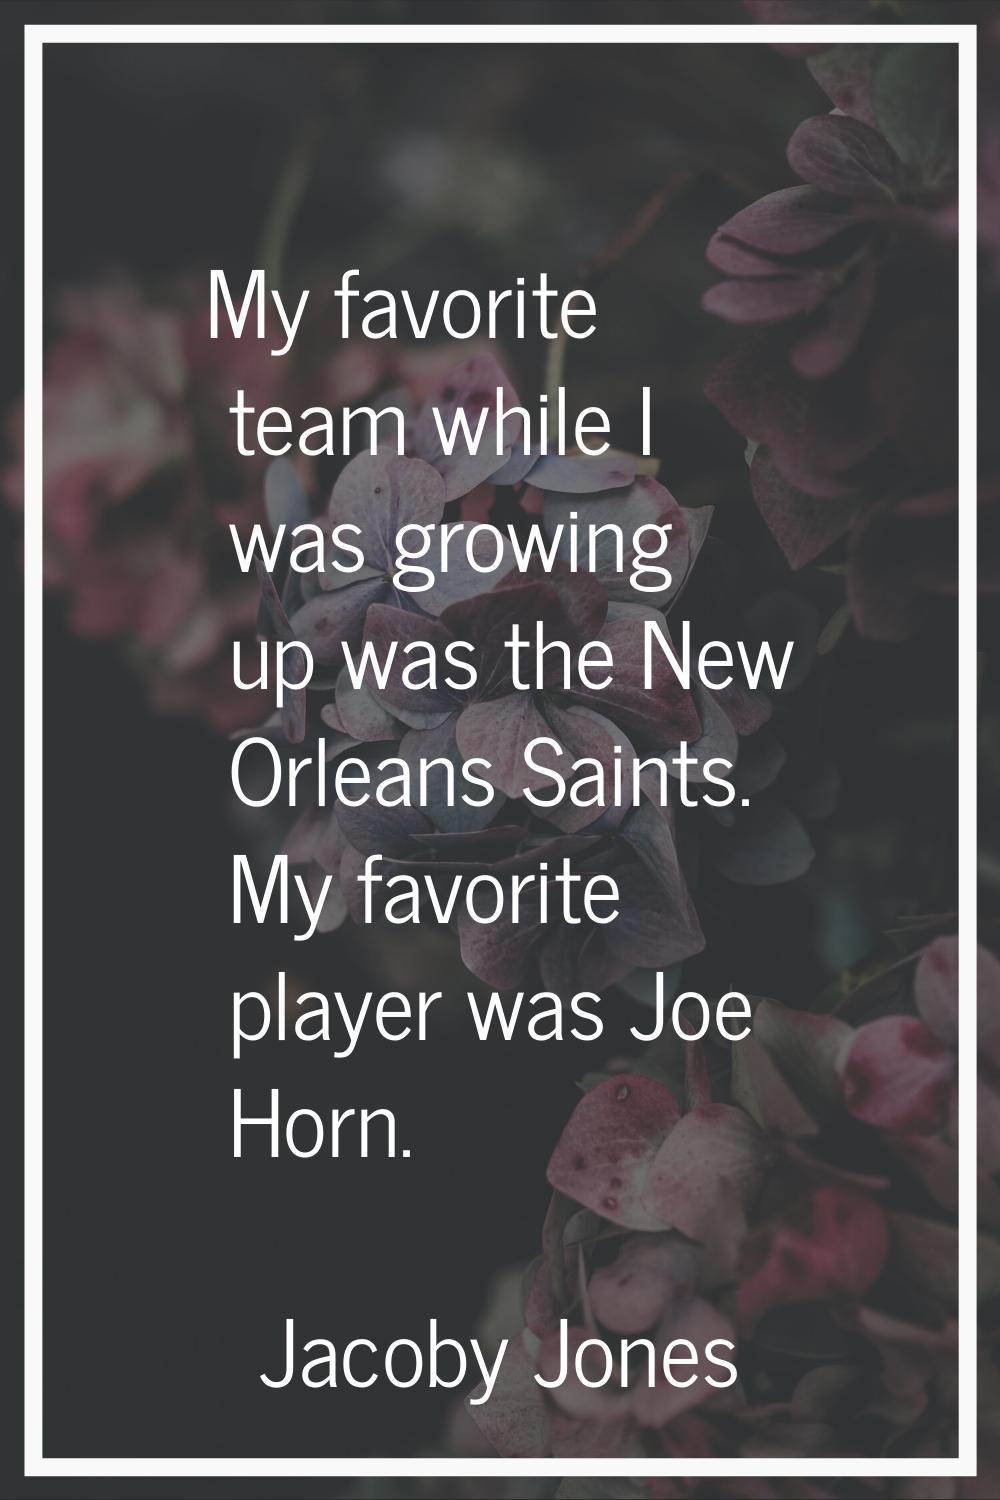 My favorite team while I was growing up was the New Orleans Saints. My favorite player was Joe Horn